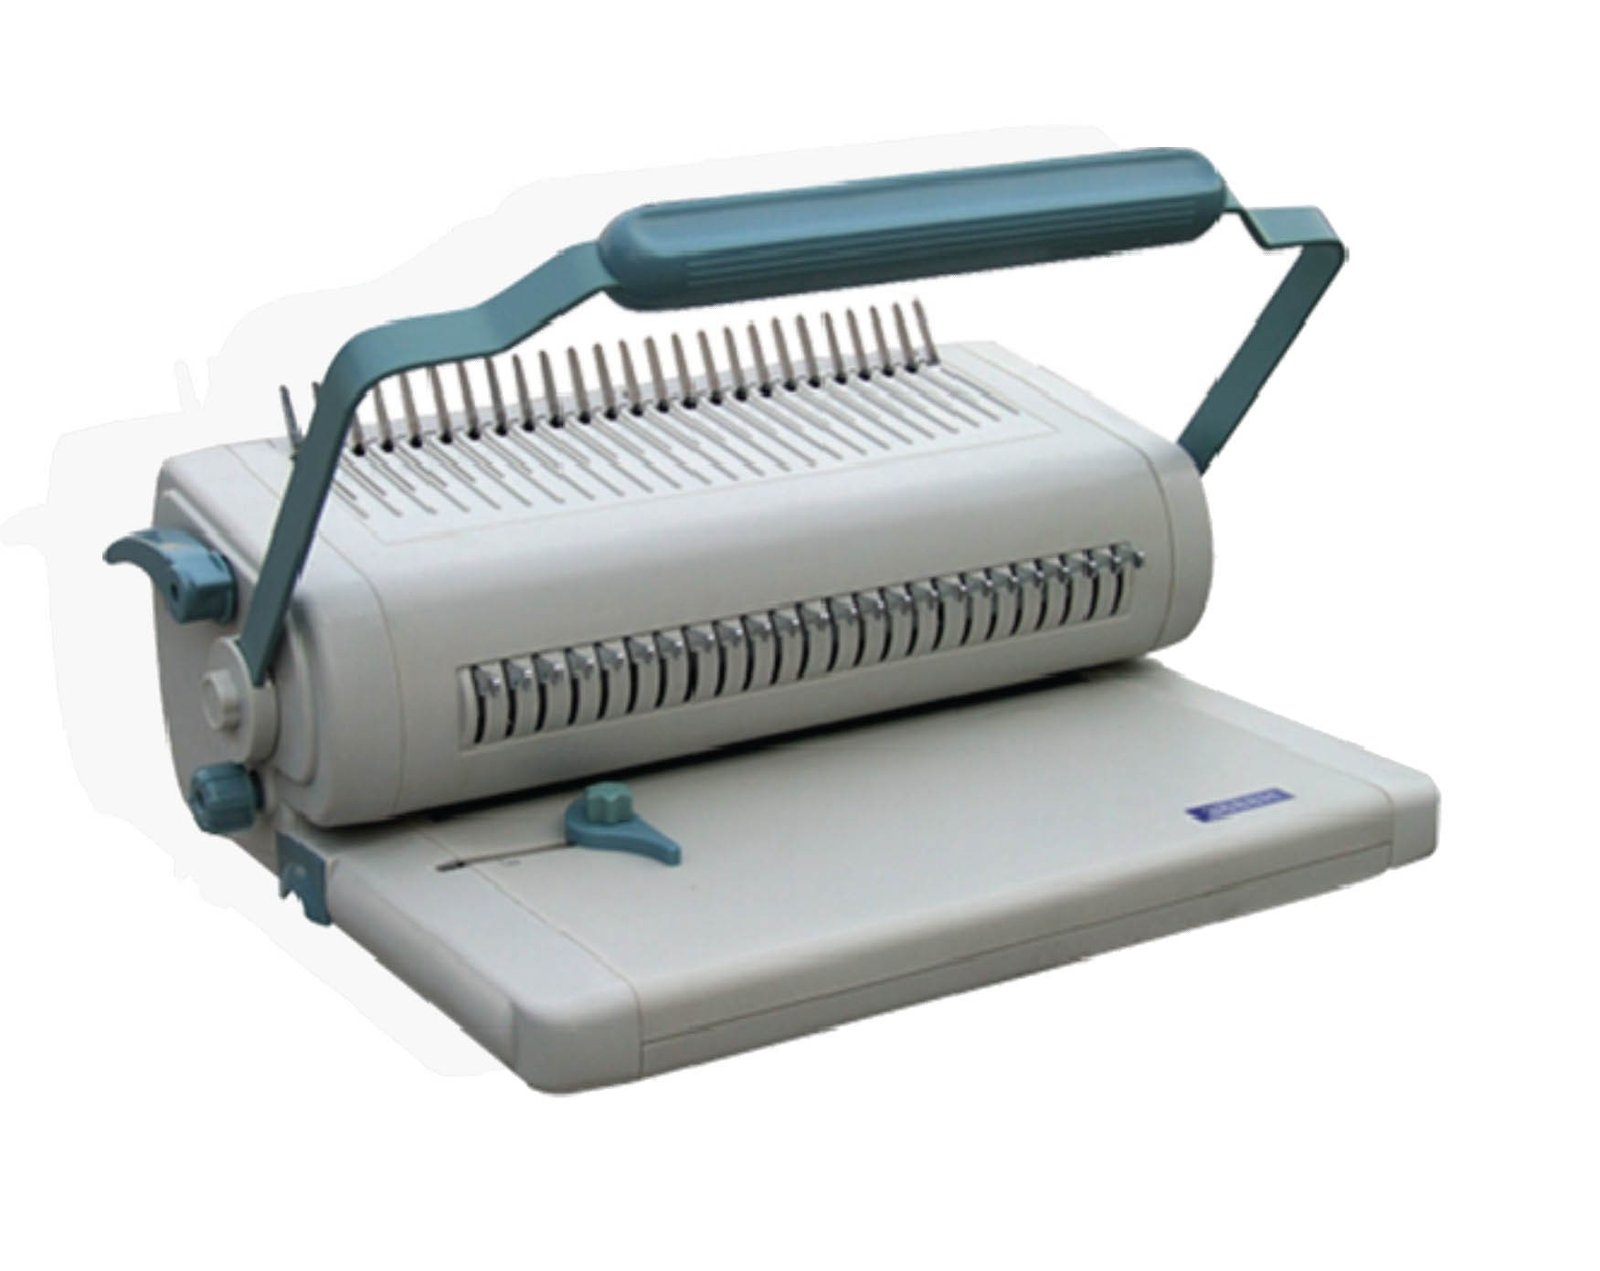 Binding machine Office Supply Punch up to:25 sheets each time 24hold ,Packing :~1/2,Measure :55x49x45.5 cm